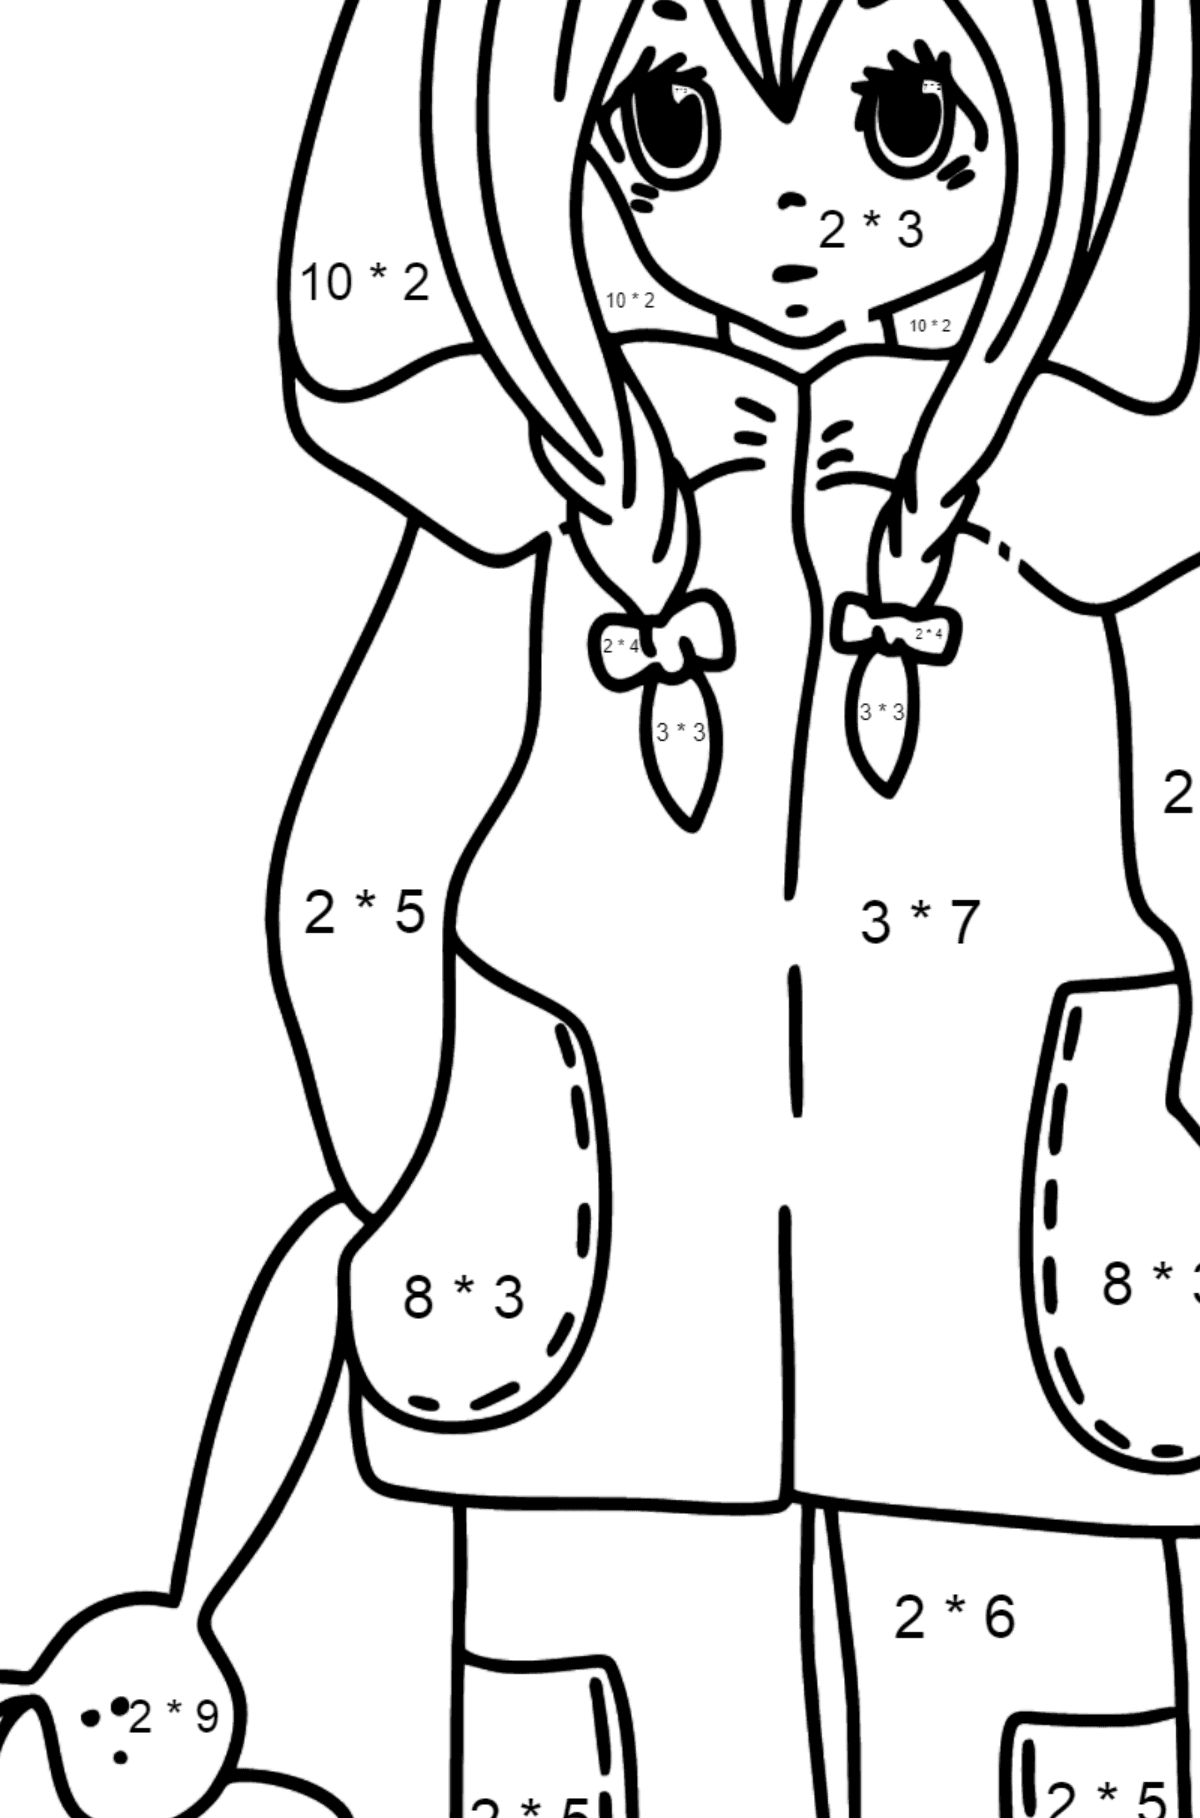 Anime girl with pigtails coloring page - Math Coloring - Multiplication for Kids